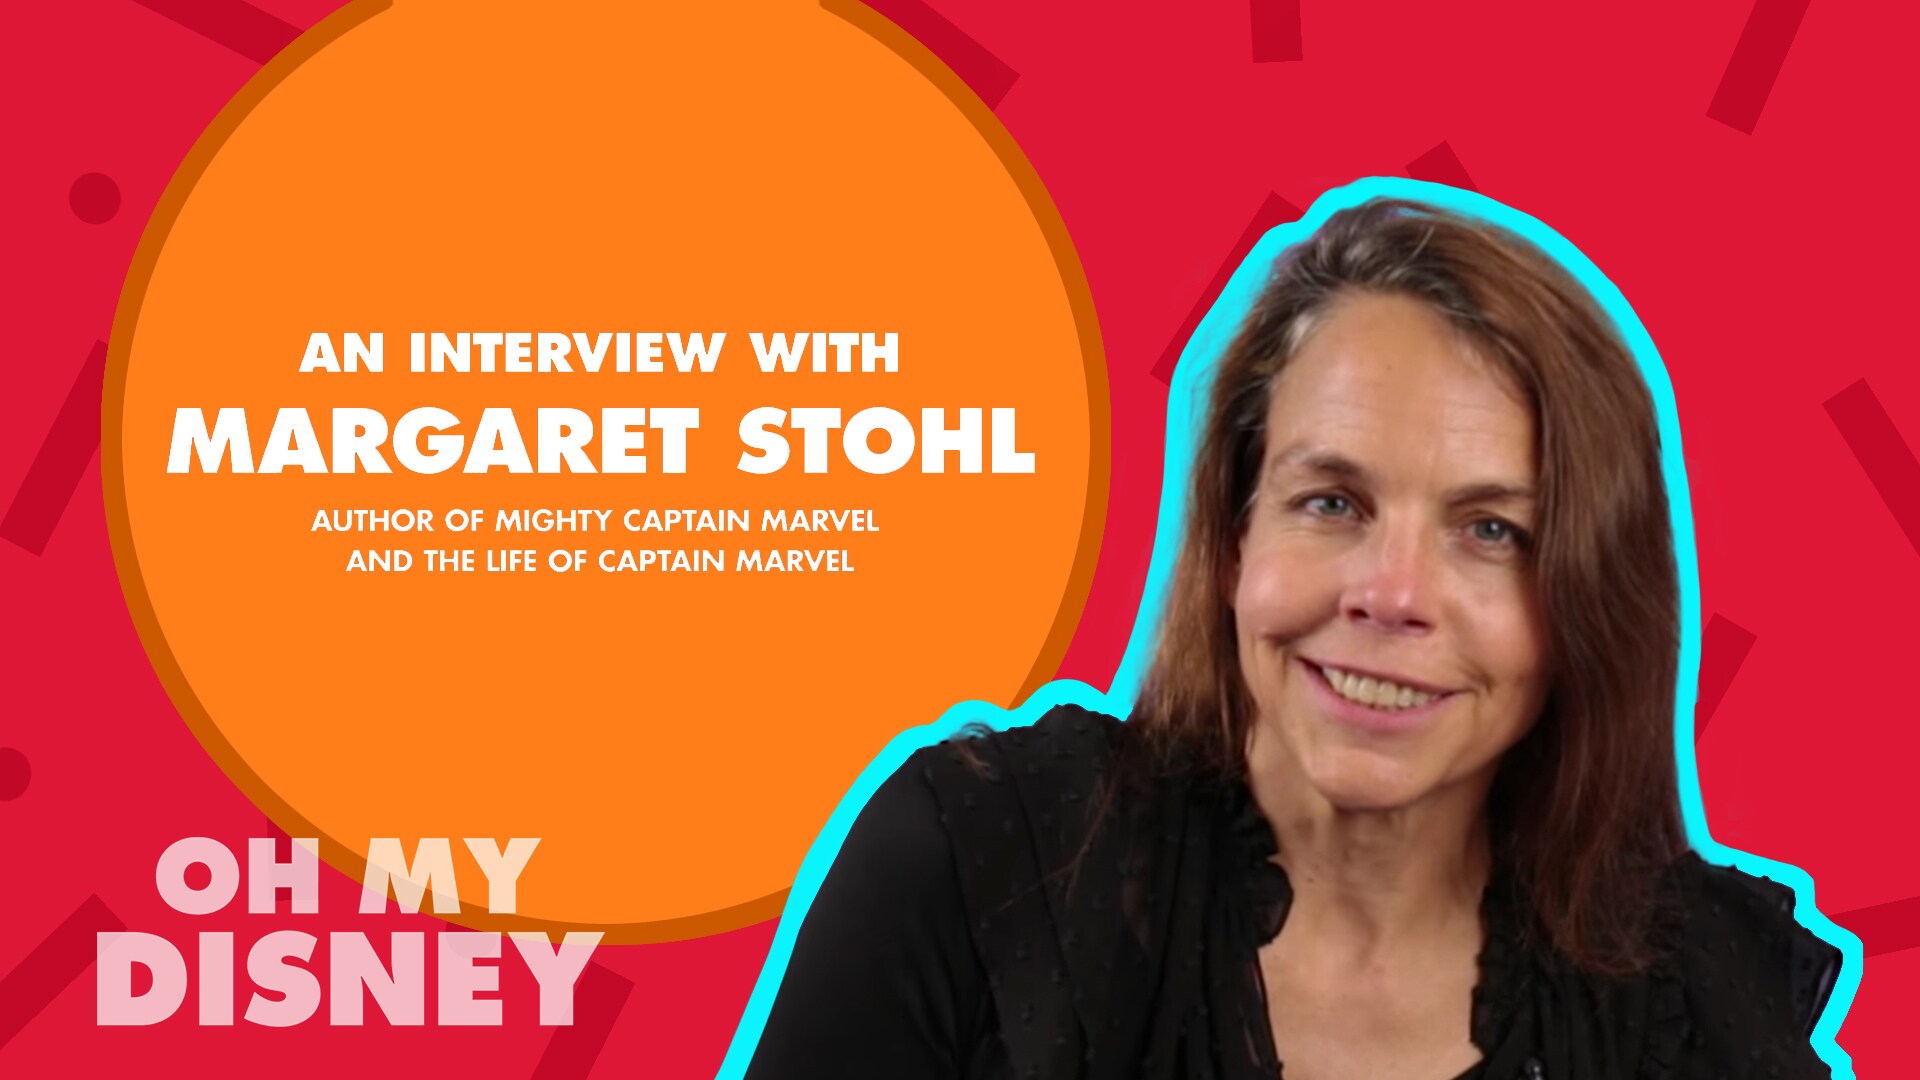 DISNEY INSIDER: สัมภาษณ์พิเศษ MARGARET STOHL ผู้แต่ง MIGHTY CAPTAIN MARVEL และ THE LIFE OF CAPTAIN MARVEL